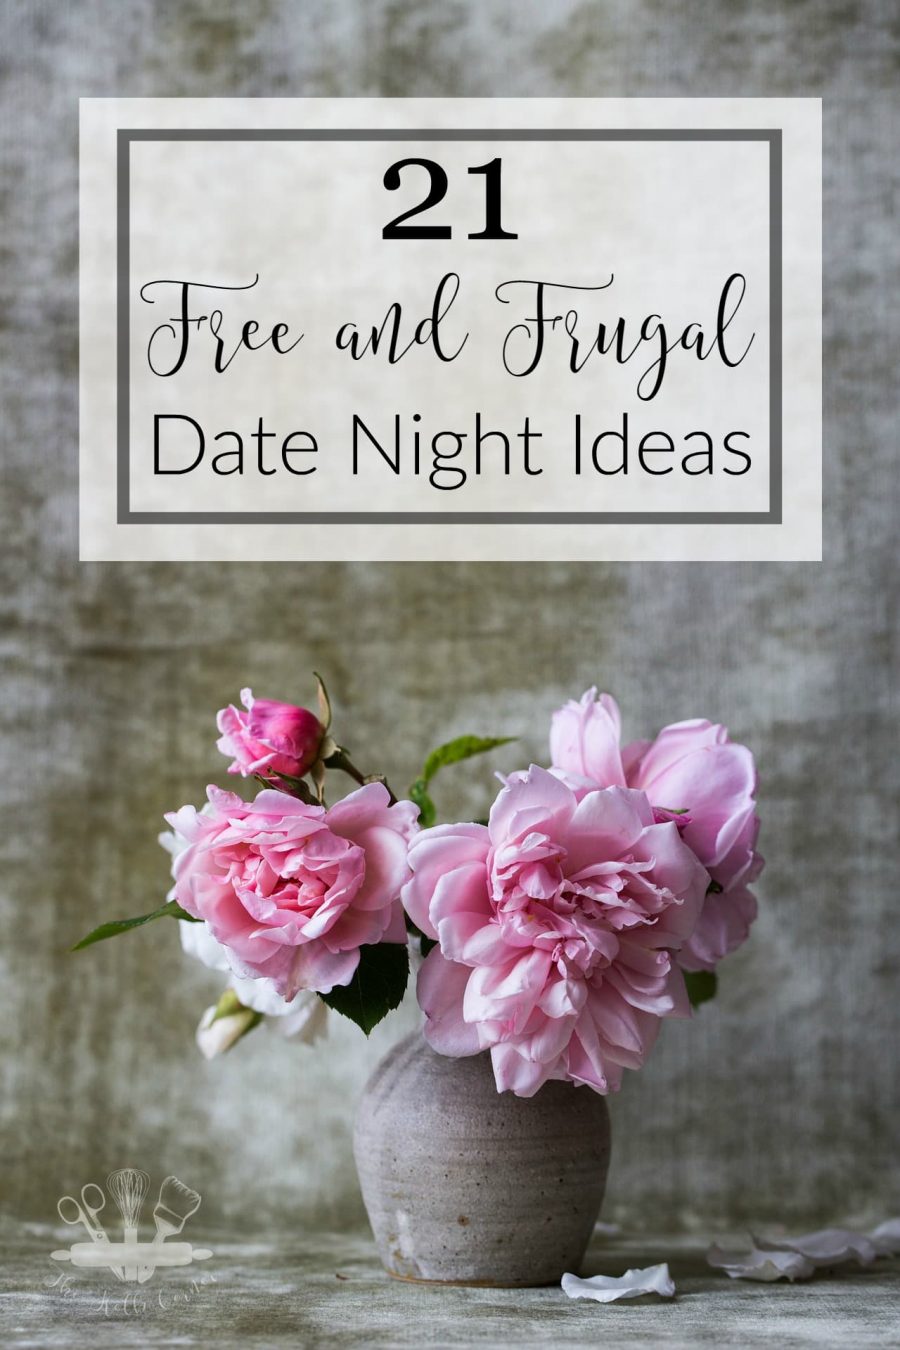 21-free-and-frugal-date-night-ideas